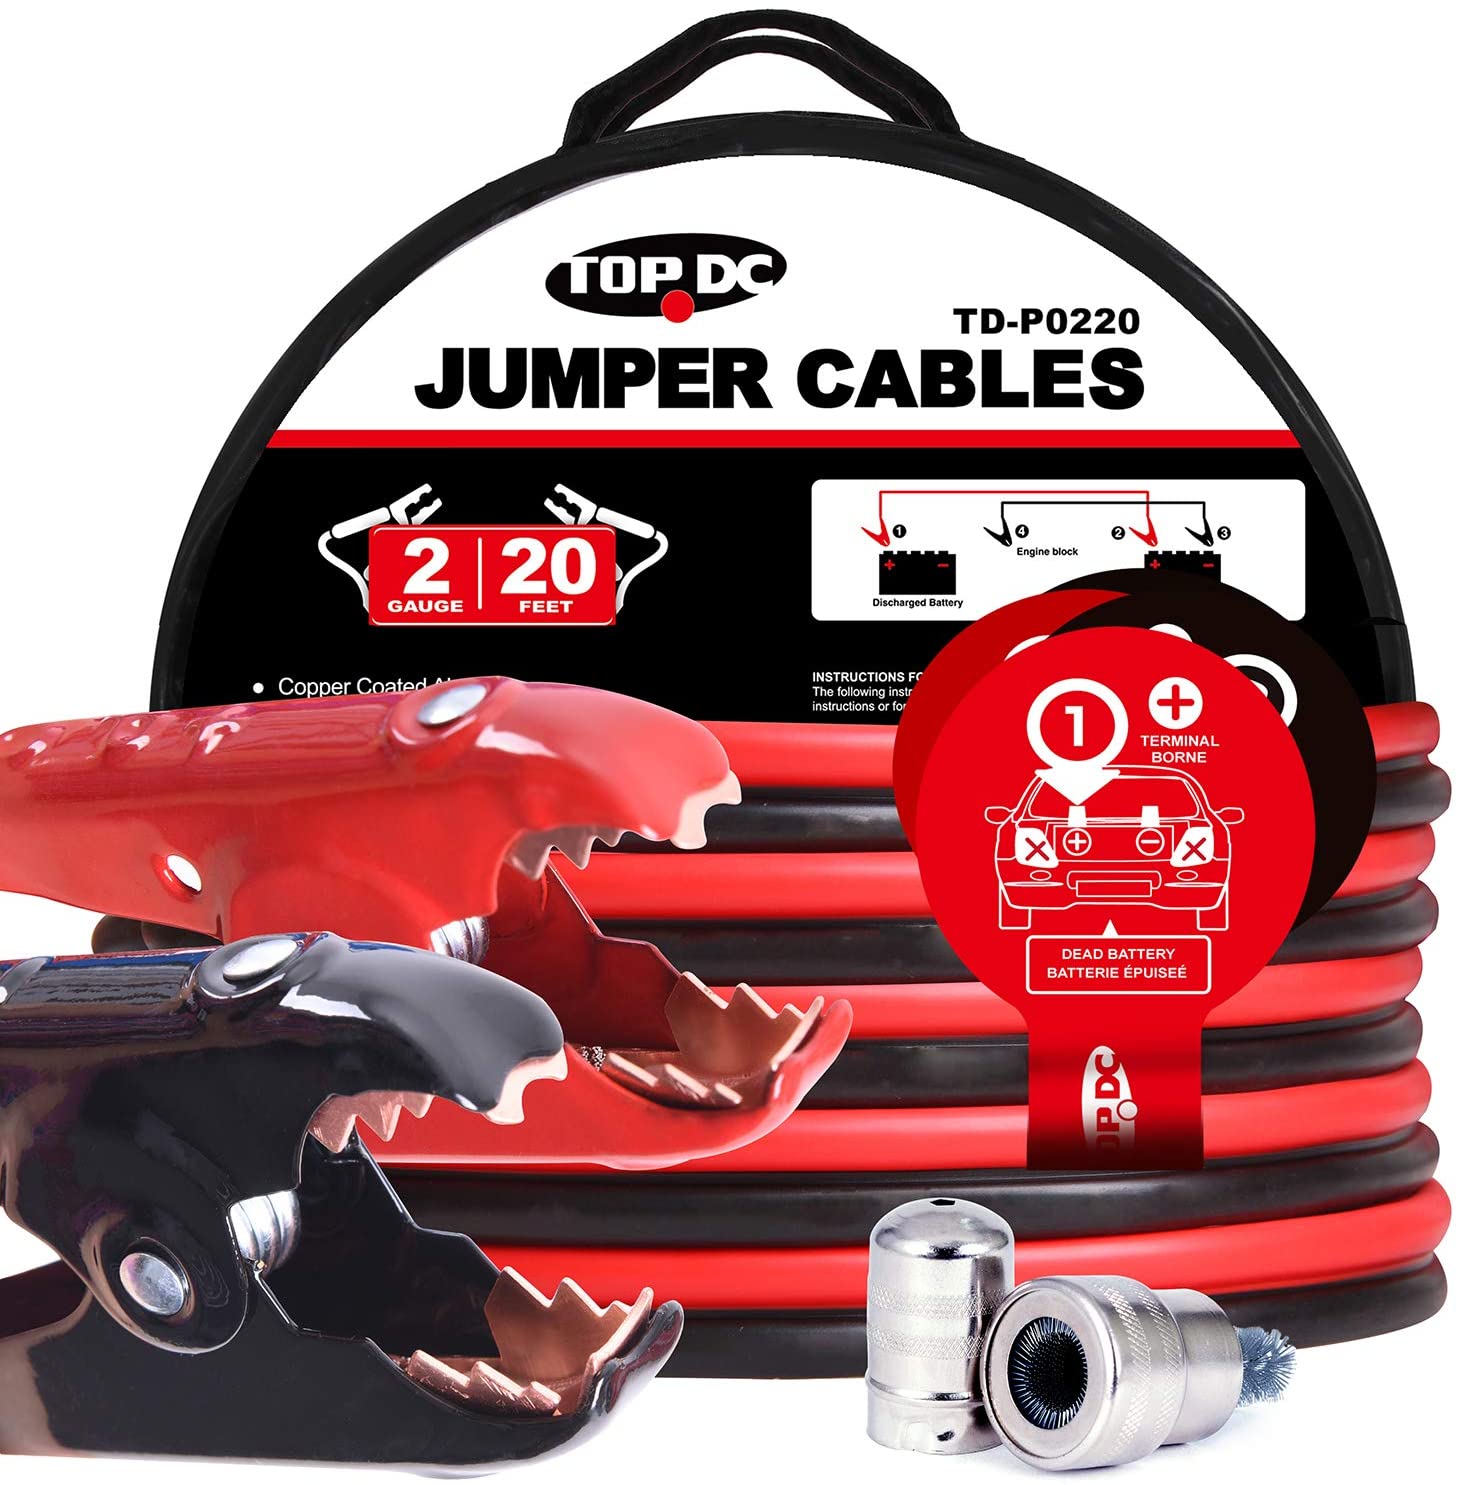 TOPDC Jumper Cables